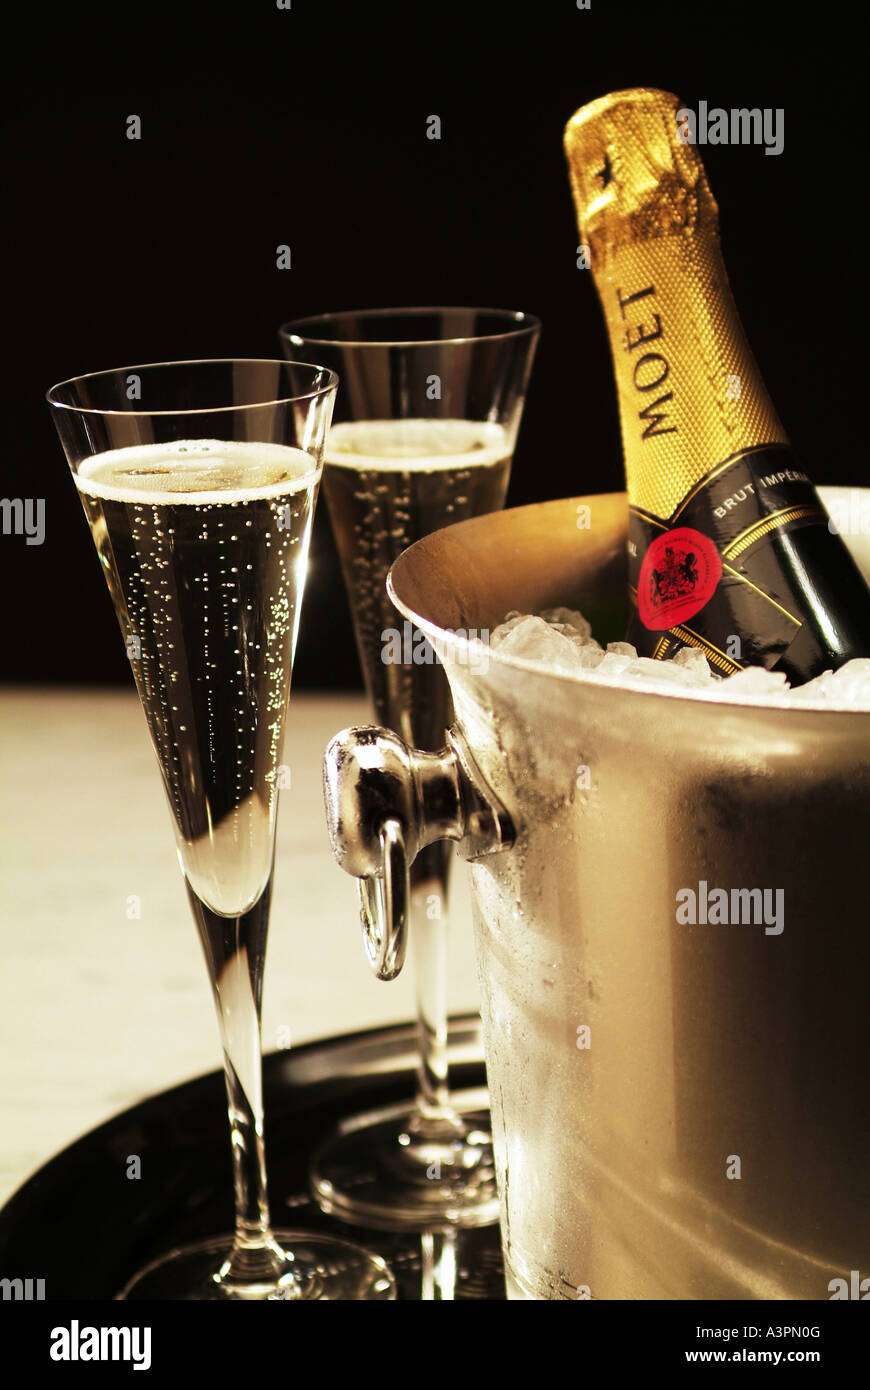 Champagne glasses and a champagne bottle in an ice bucket Stock Photo -  Alamy